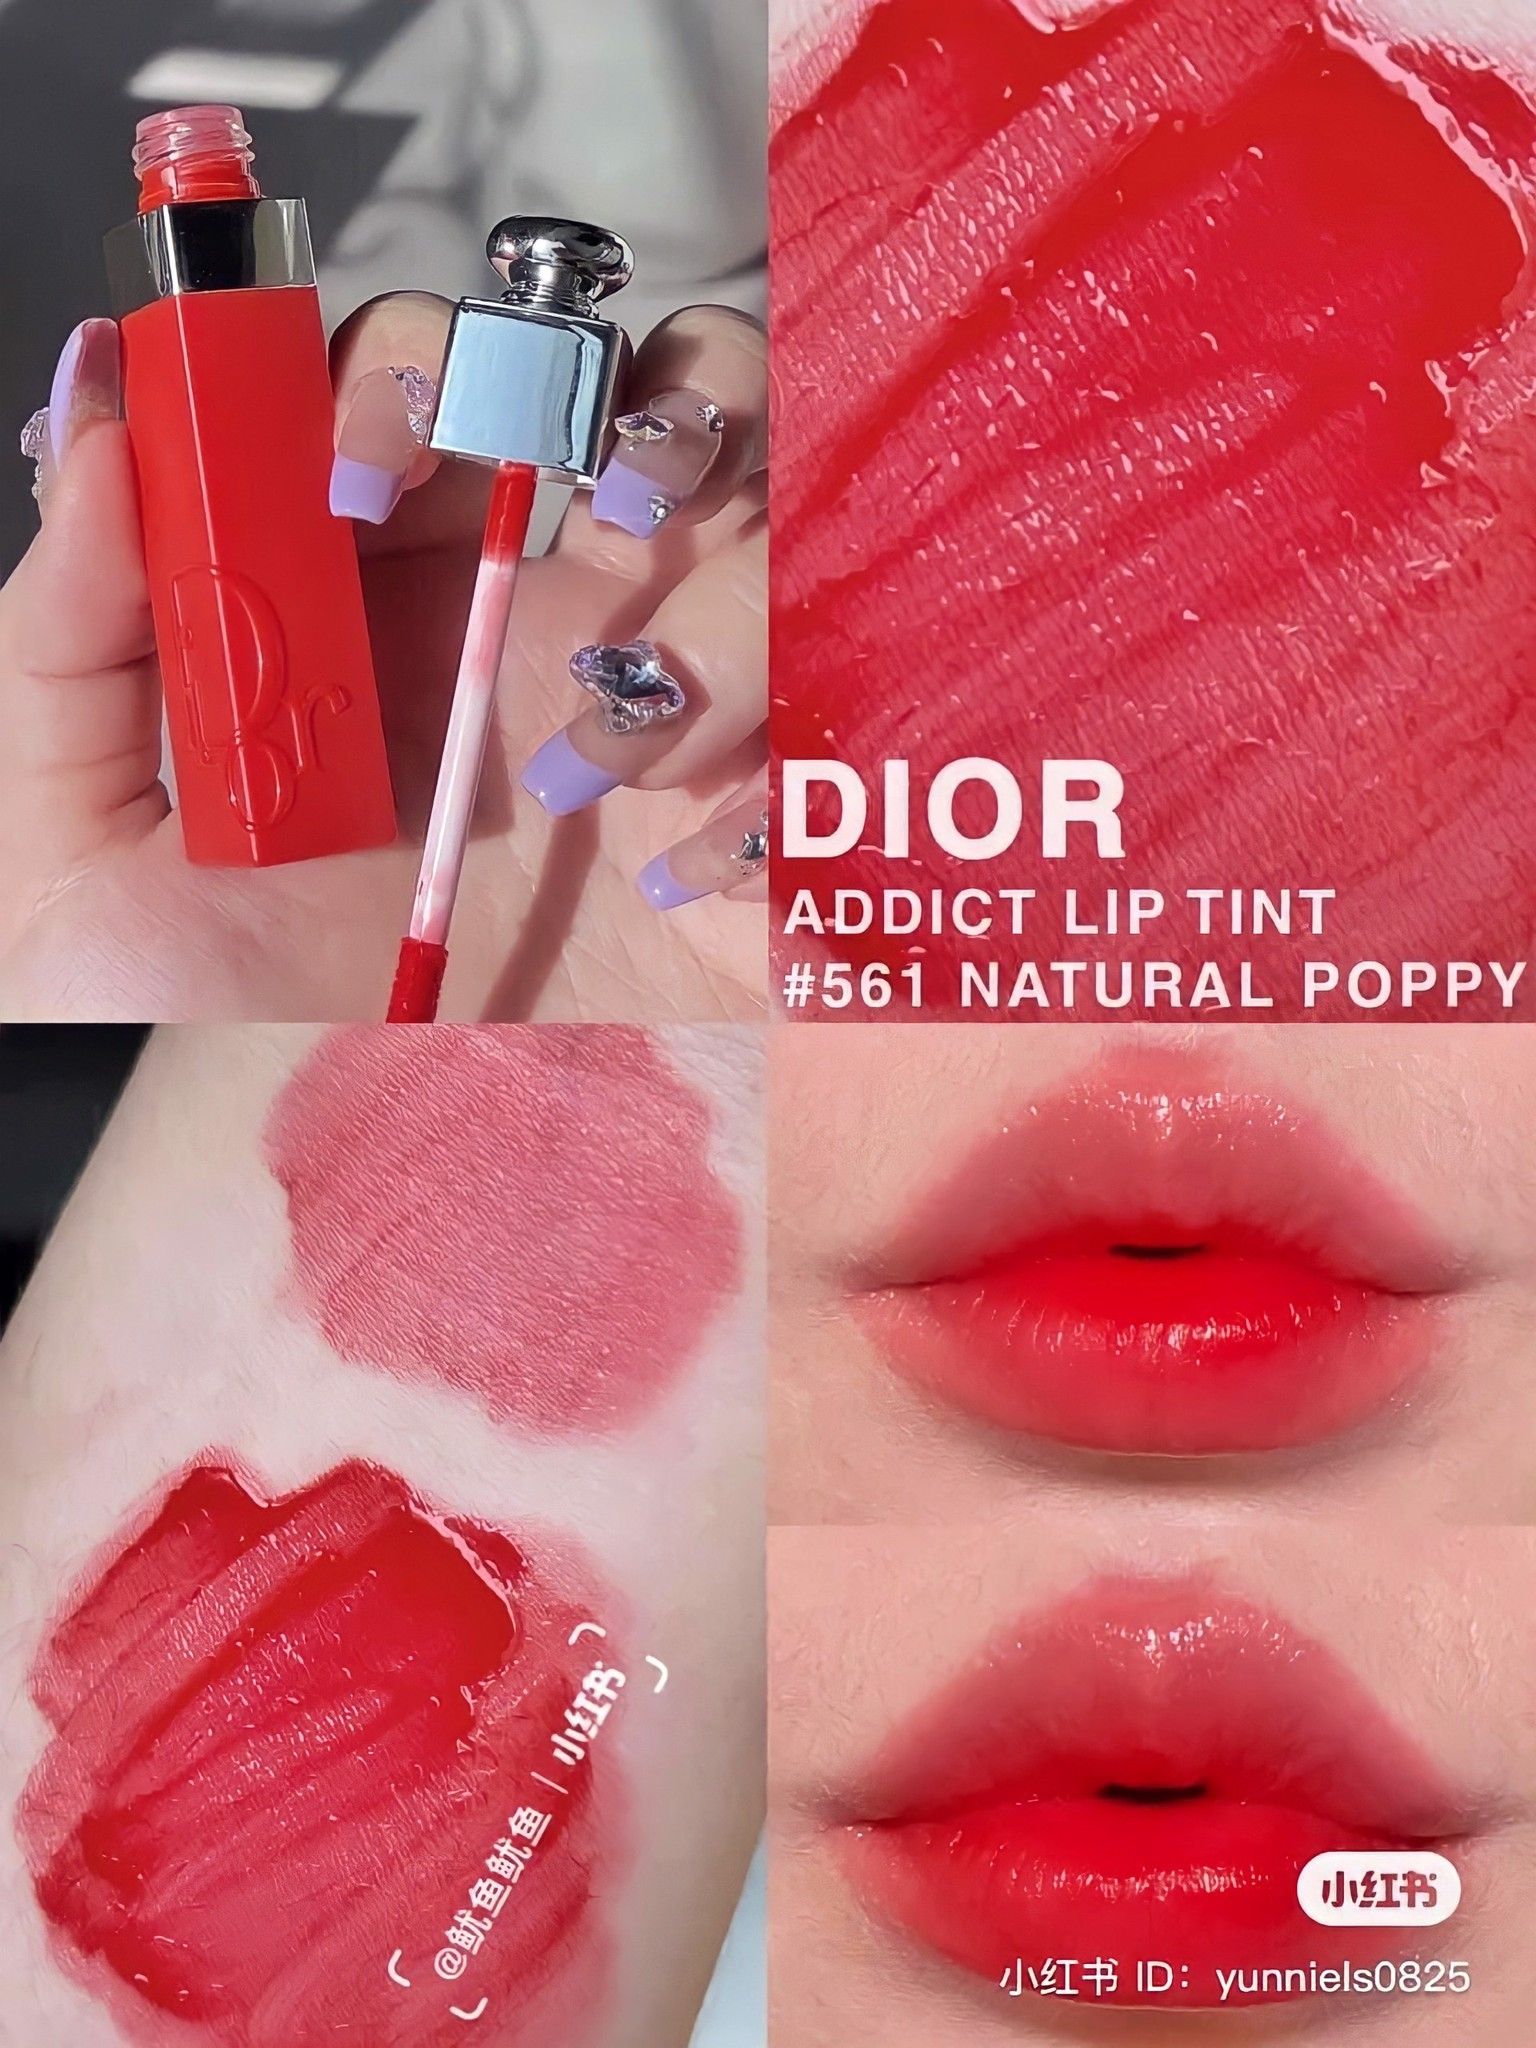 Review Dior Lip Tattoo  Liptint Honest Review  Gallery posted by  Jerisatanta  Lemon8